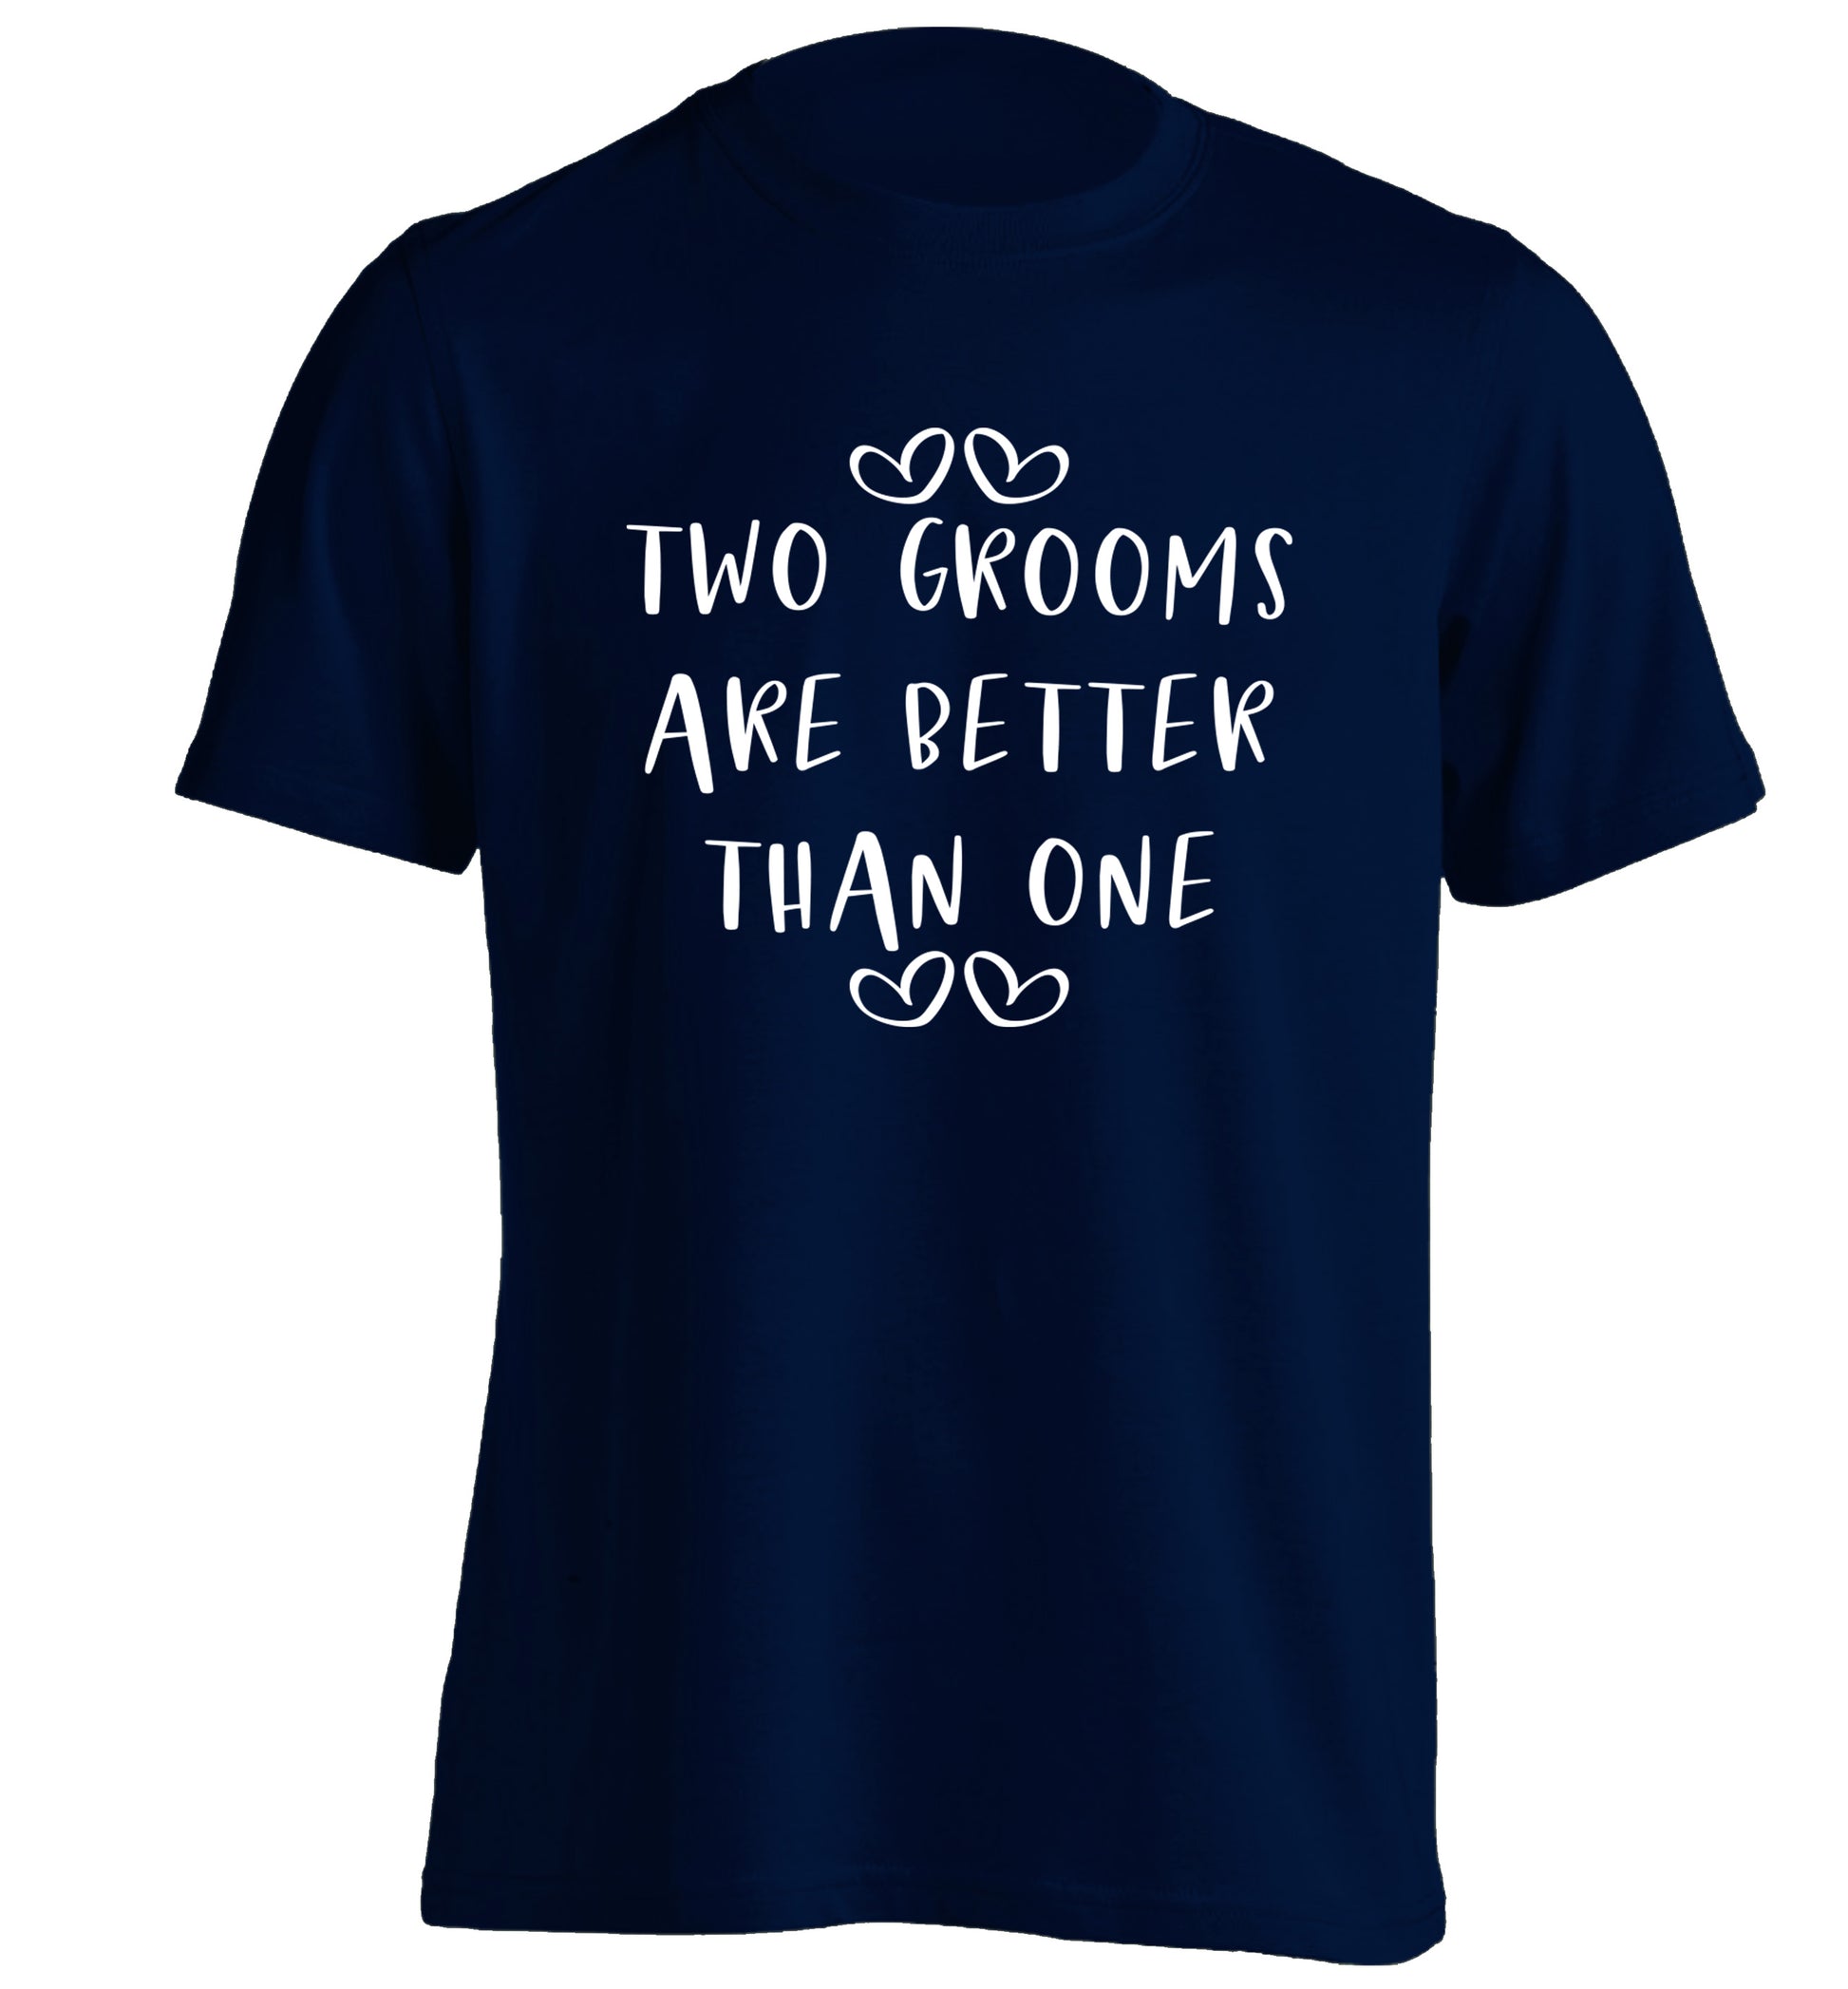 Two grooms are better than one adults unisex navy Tshirt 2XL